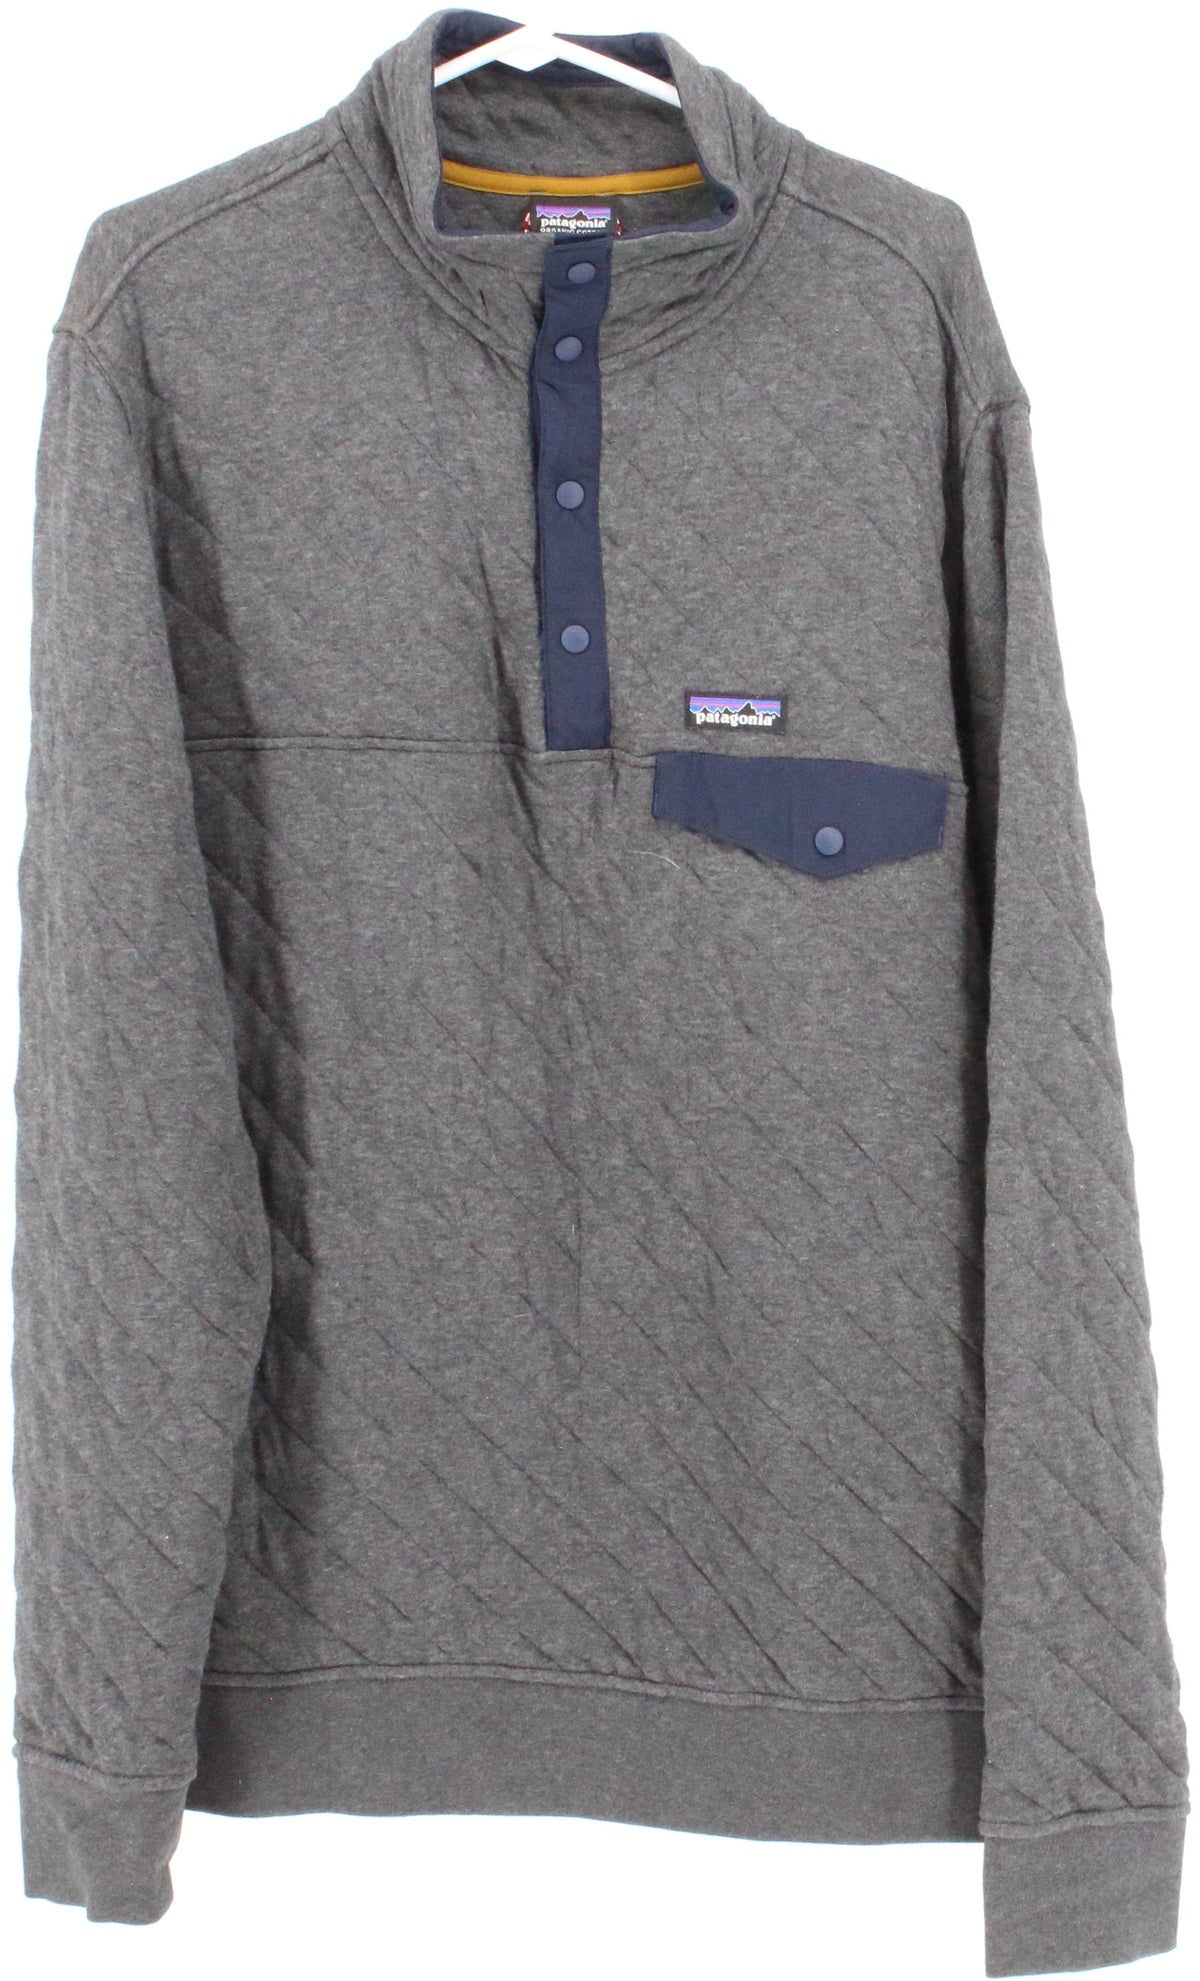 Patagonia Textured Grey and Navy Blue Long Sleeved Buttons T-Shirt